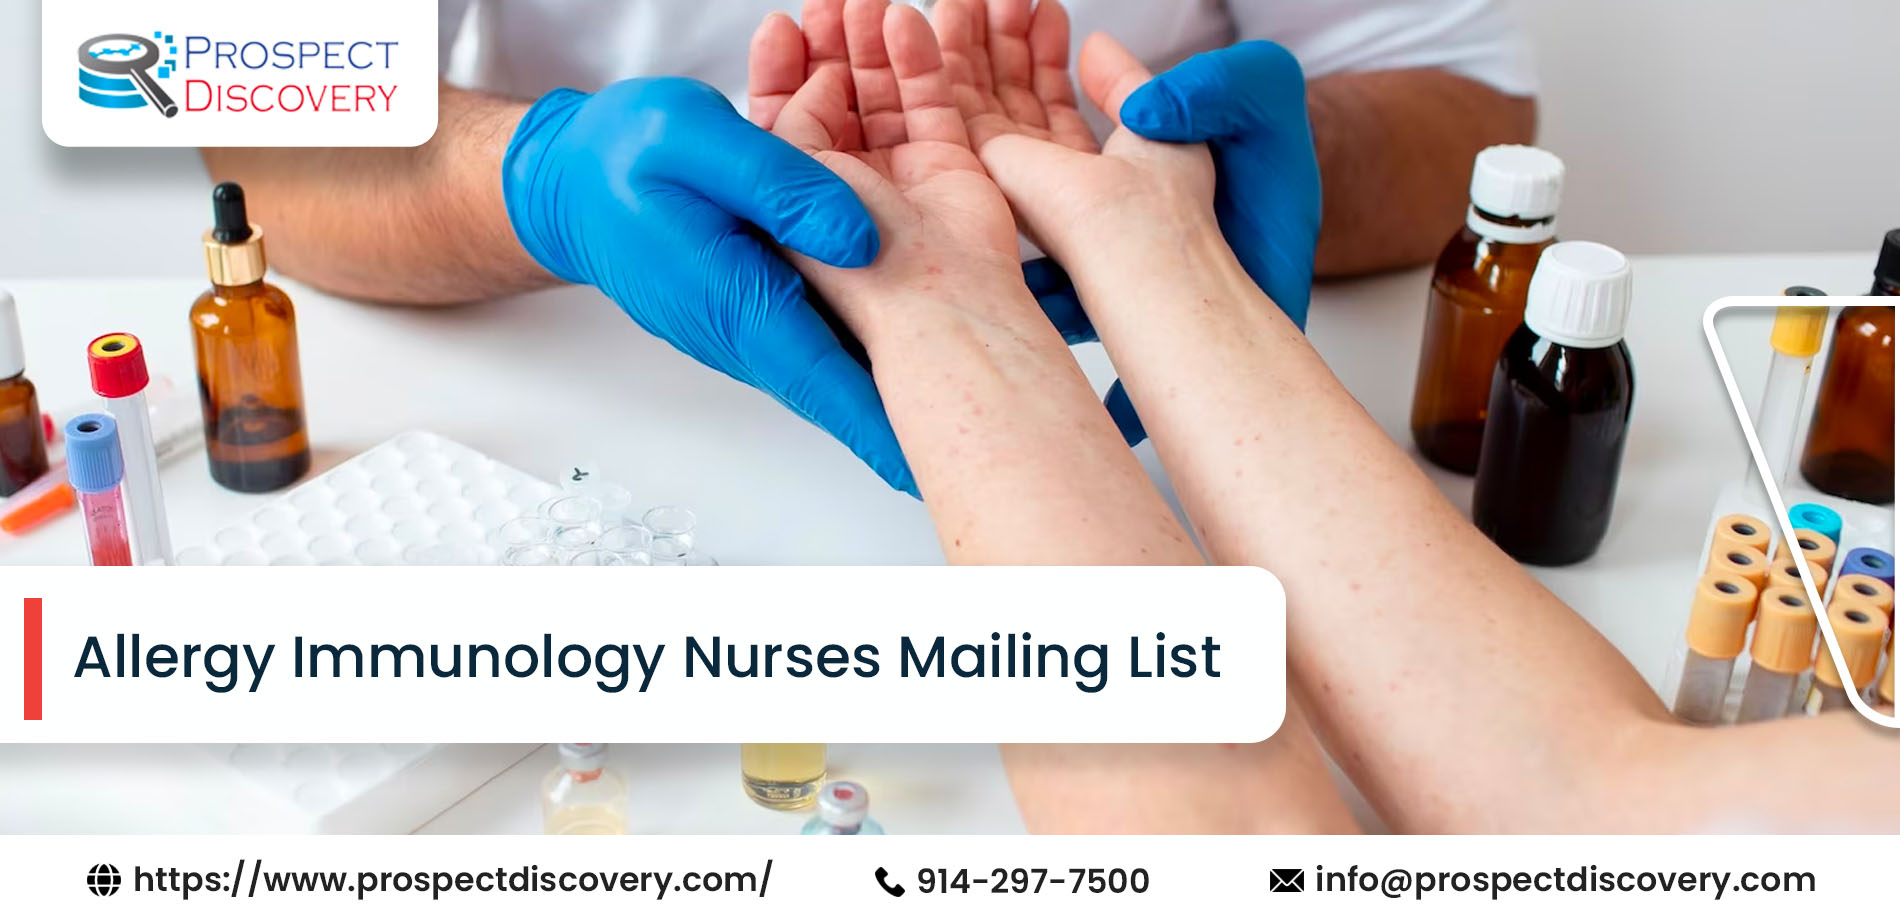 Allergy-Immunology Nurses Email List | Prospect Discovery